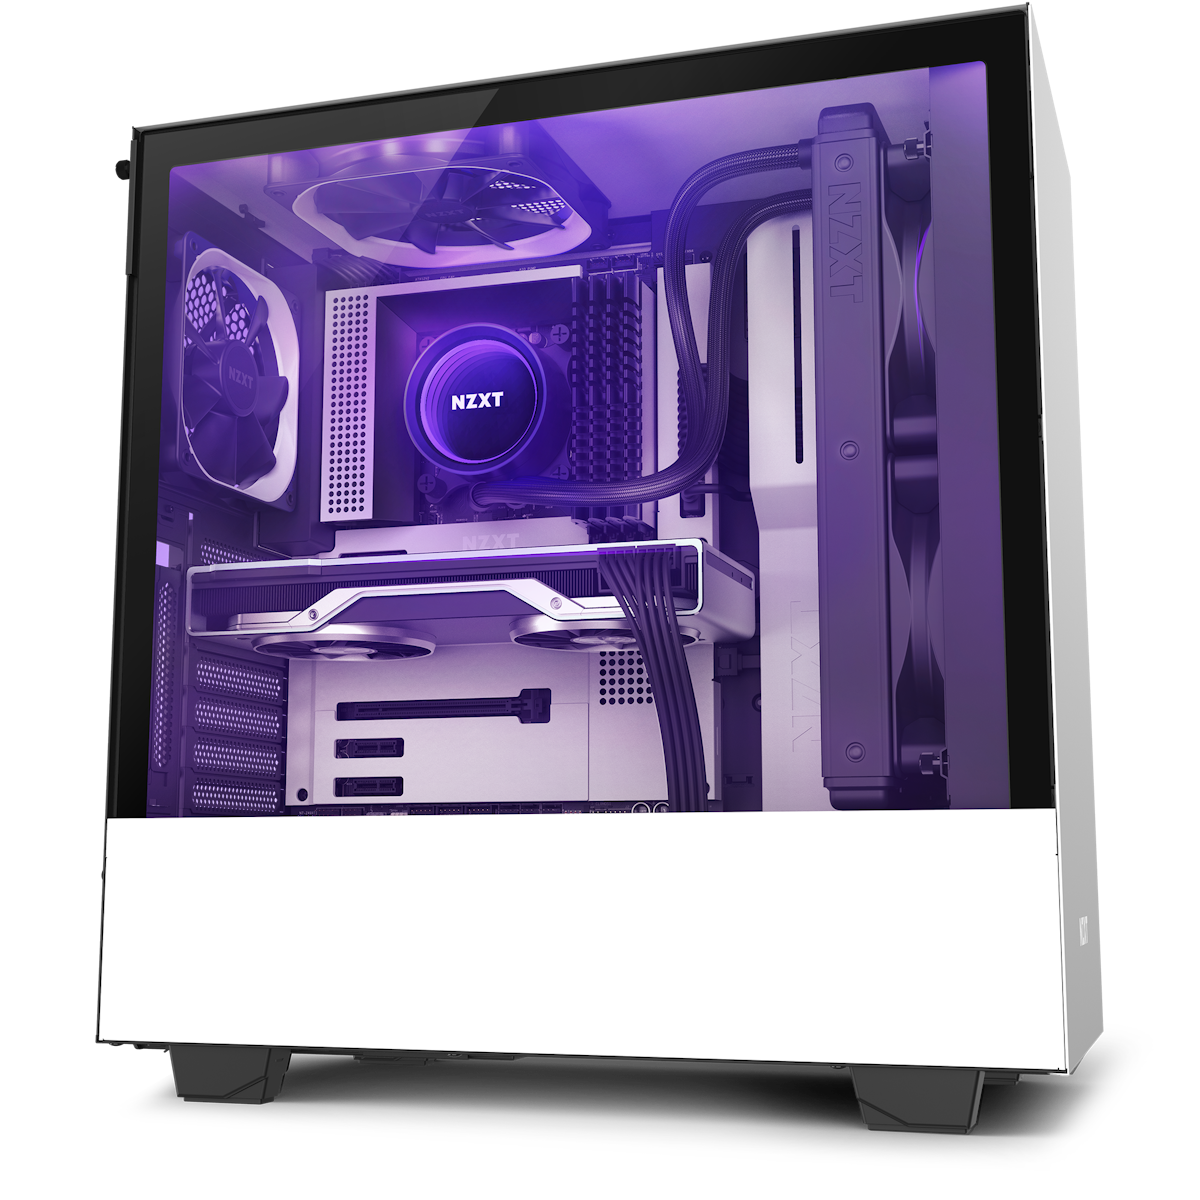 CASING PRIME GAMING K-[F] - Mid Tower ATX Case Tempered Glass